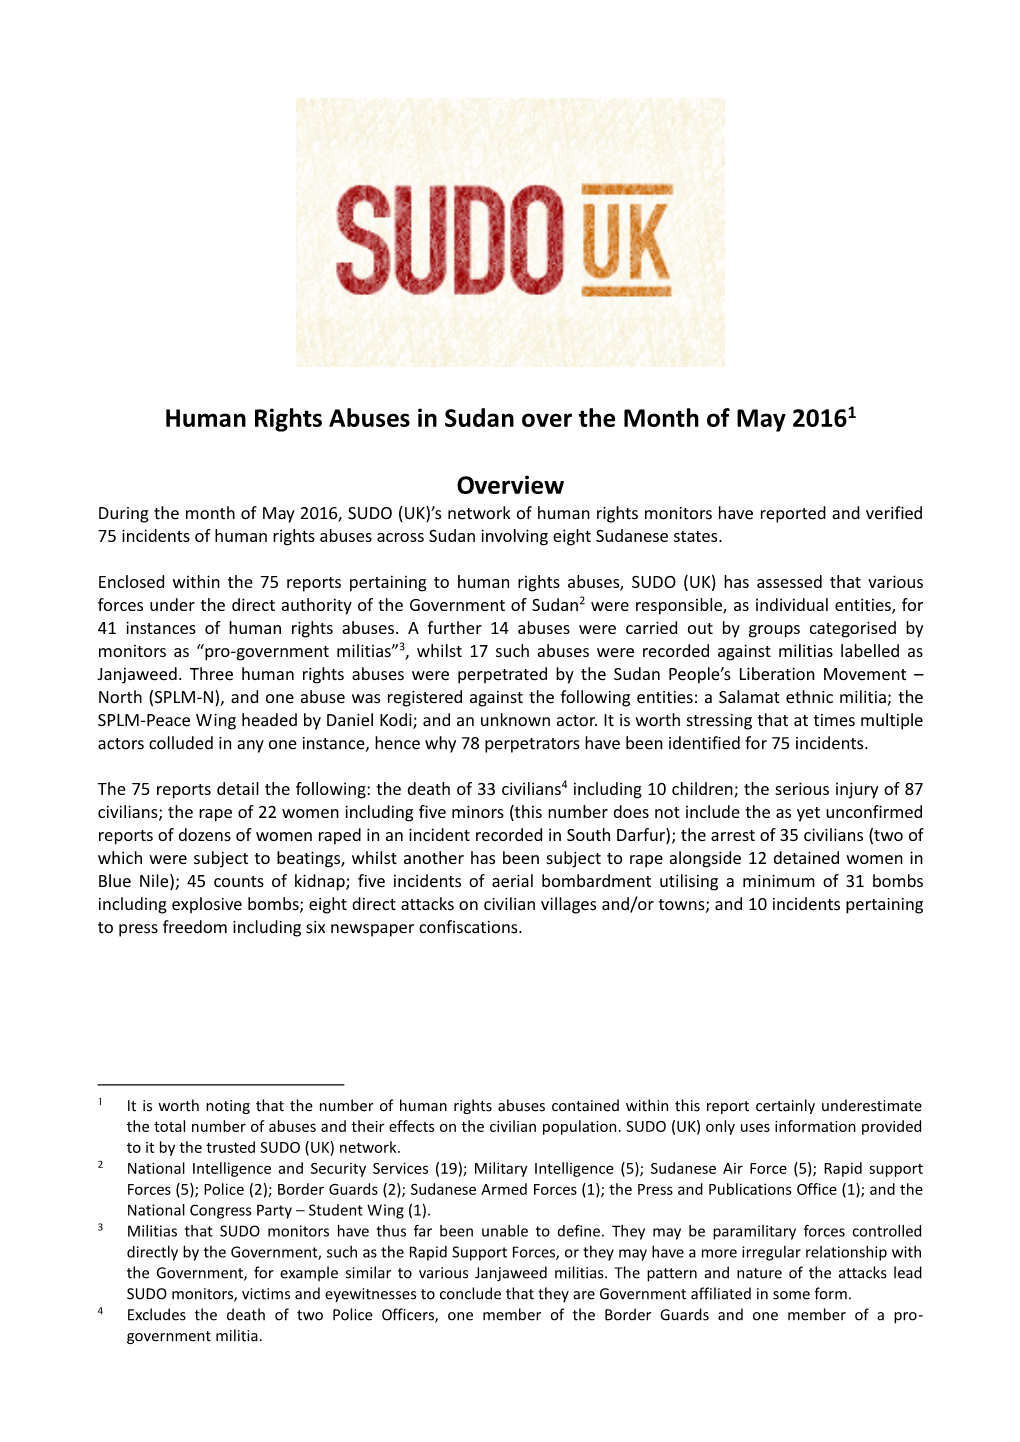 Human Rights Abuses in Sudan Over the Month of May 20161 Overview